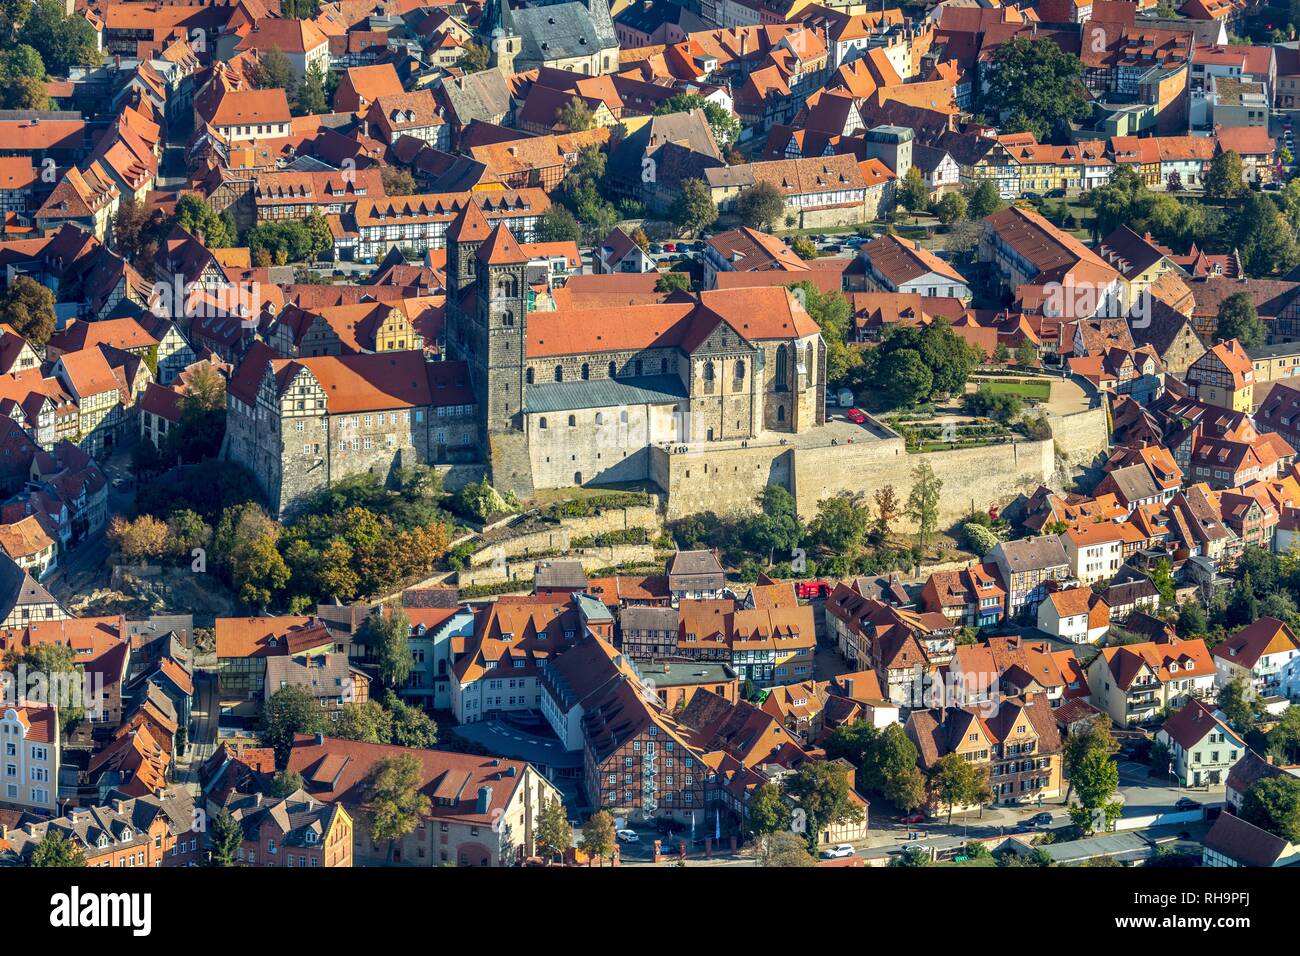 Aerial view, castle museum with old town, Quedlinburg, Saxony-Anhalt, Germany Stock Photo